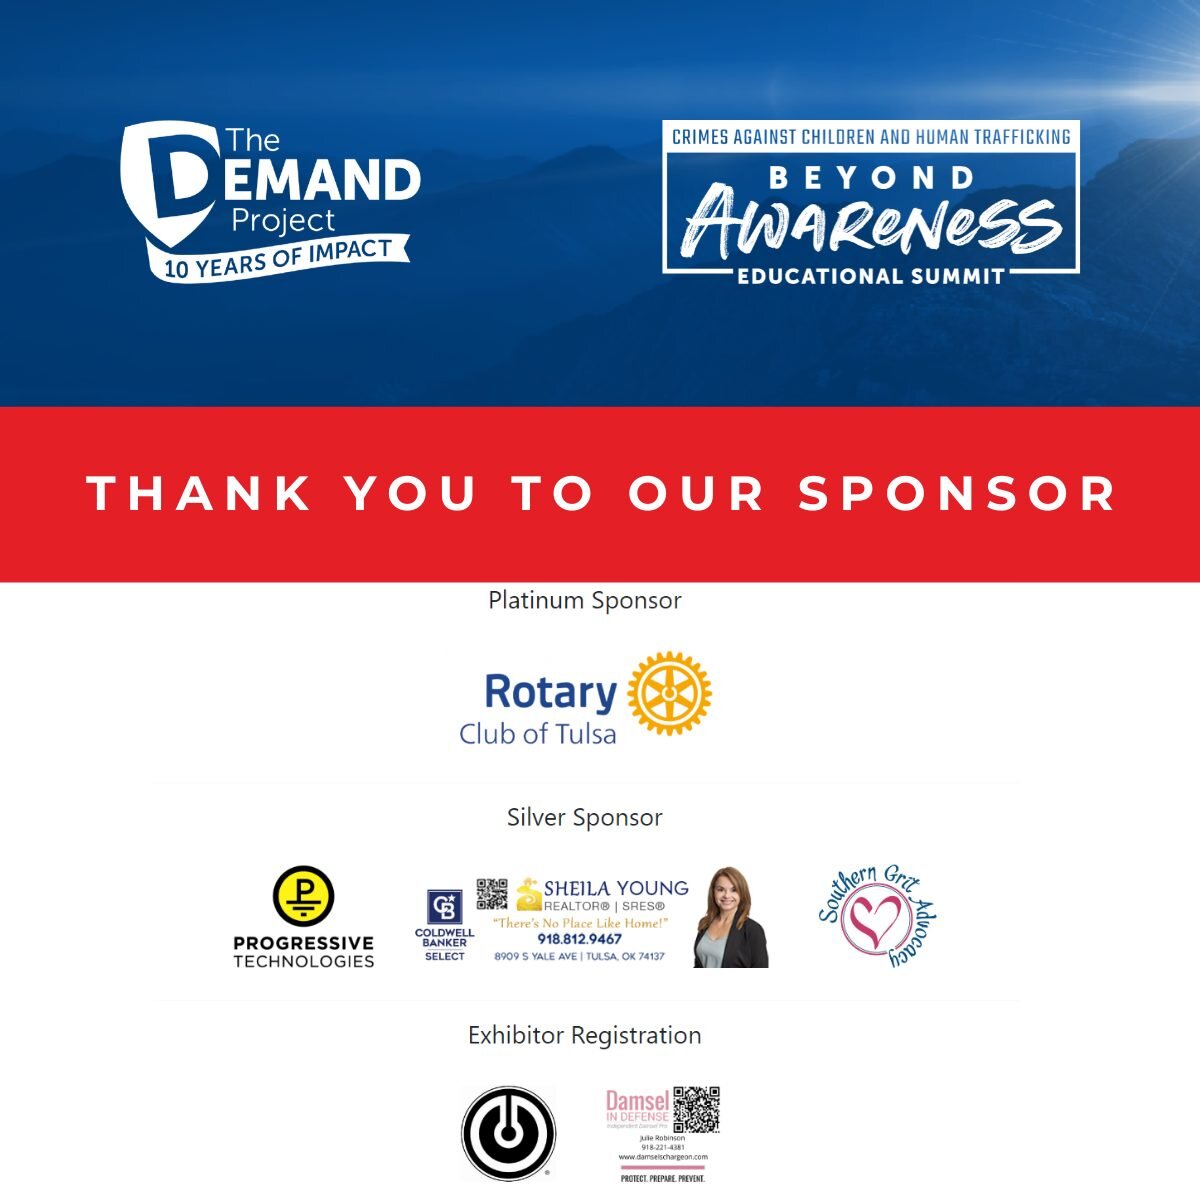 A heartfelt THANK YOU to our incredible sponsors for making the Beyond Awareness Educational Summit a resounding success!  Your unwavering support propels us beyond awareness and into impactful action, creating a shield of protection for children vul